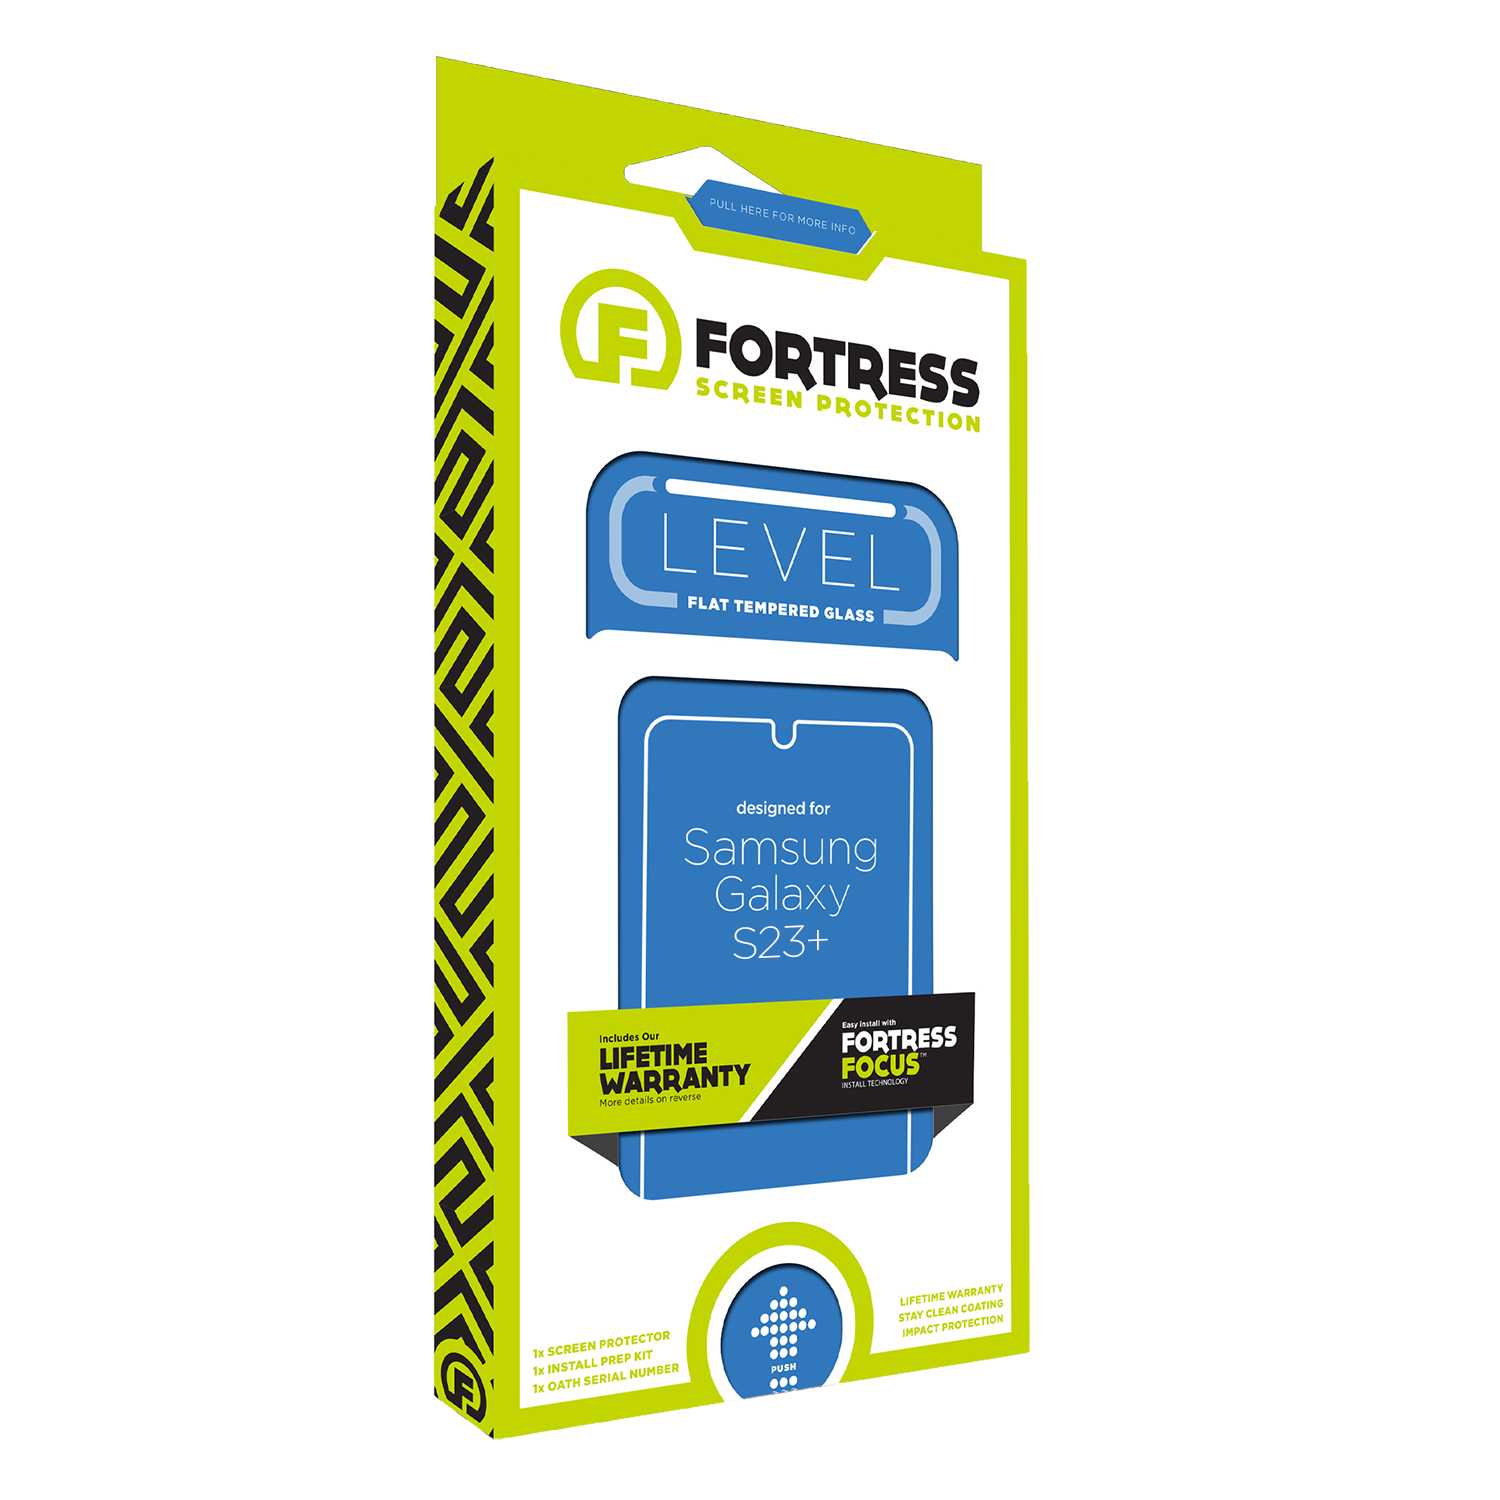 Fortress Samsung Galaxy S23+ Screen Protector - $200 Device Coverage  Scooch Screen Protector